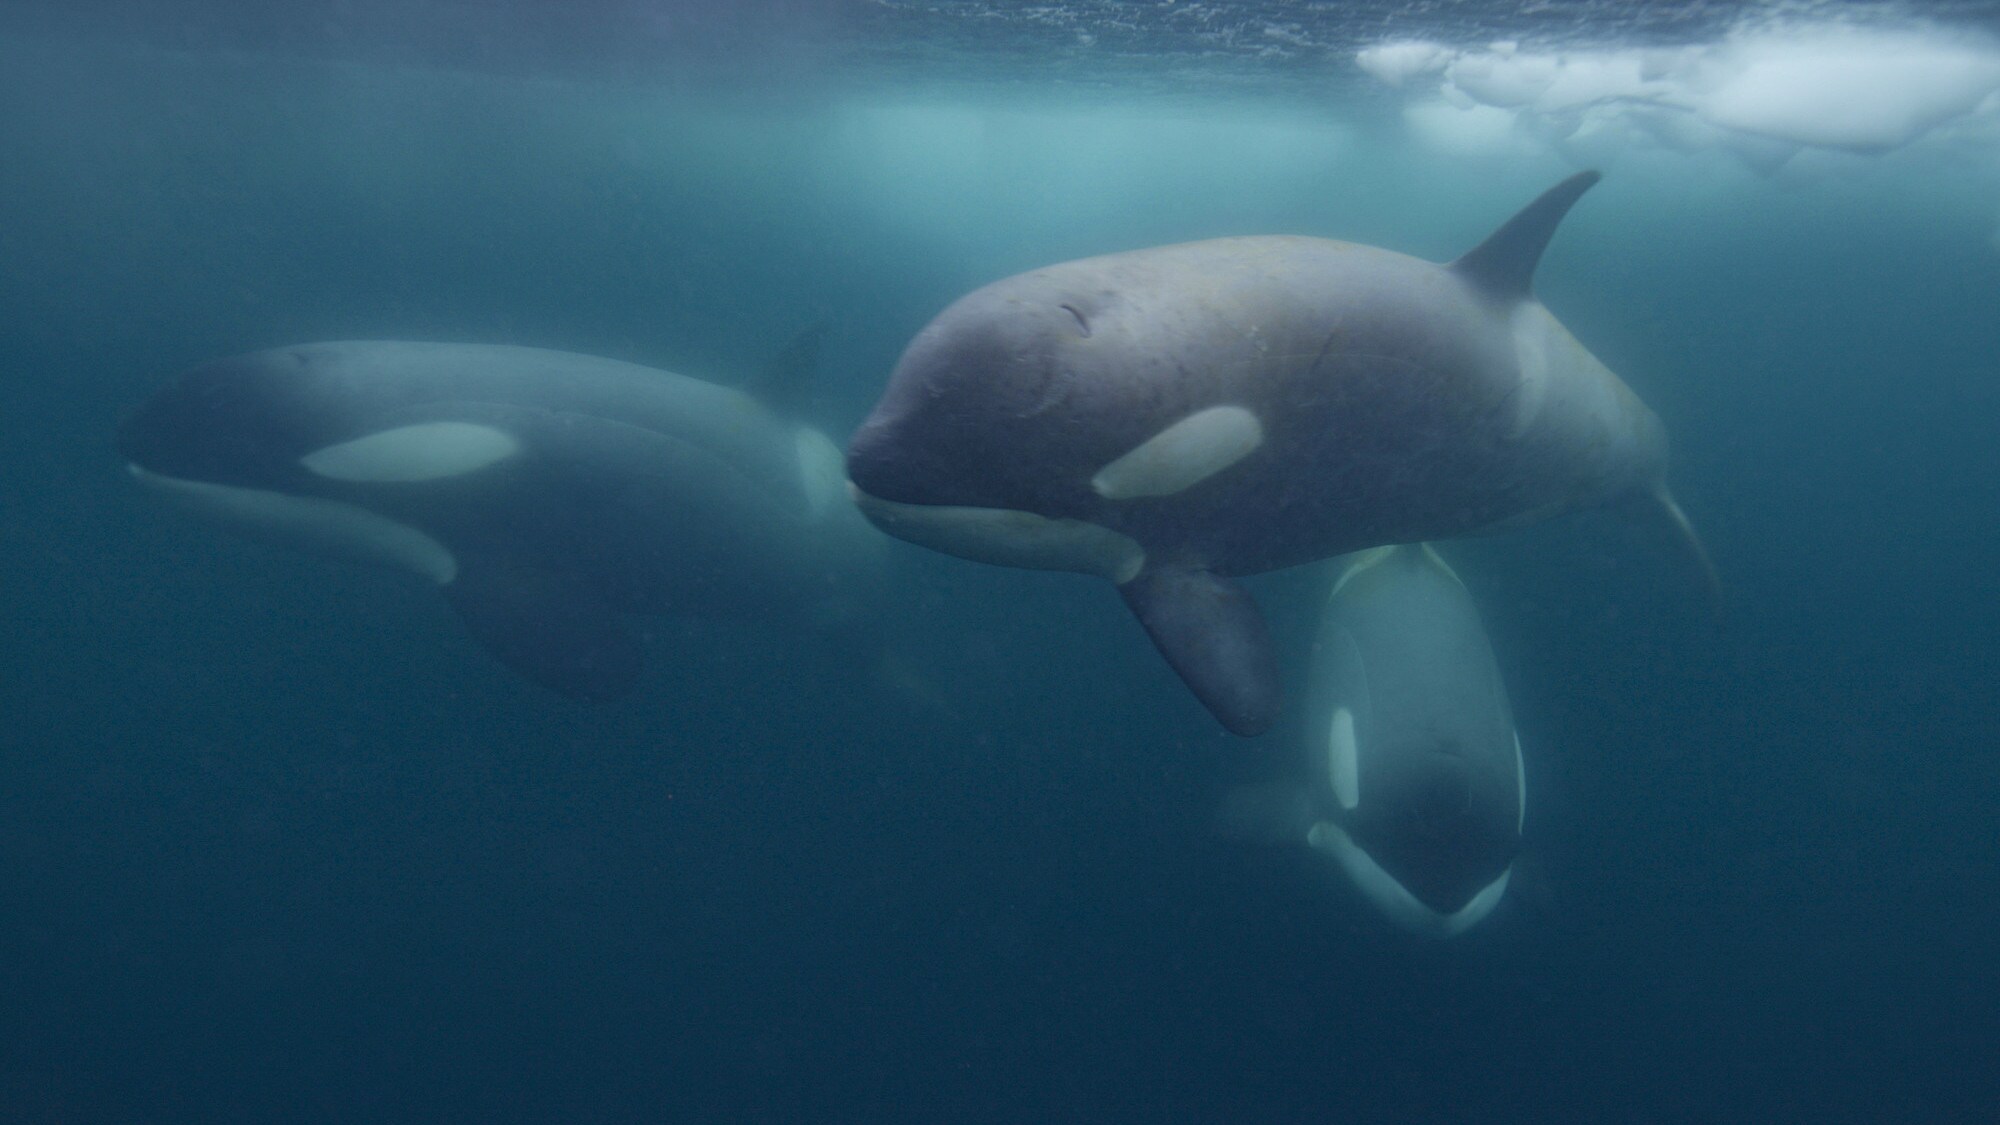 Underwater shot of two killer whales near the surface.  (credit: National Geographic for Disney+/Bertie Gregory)